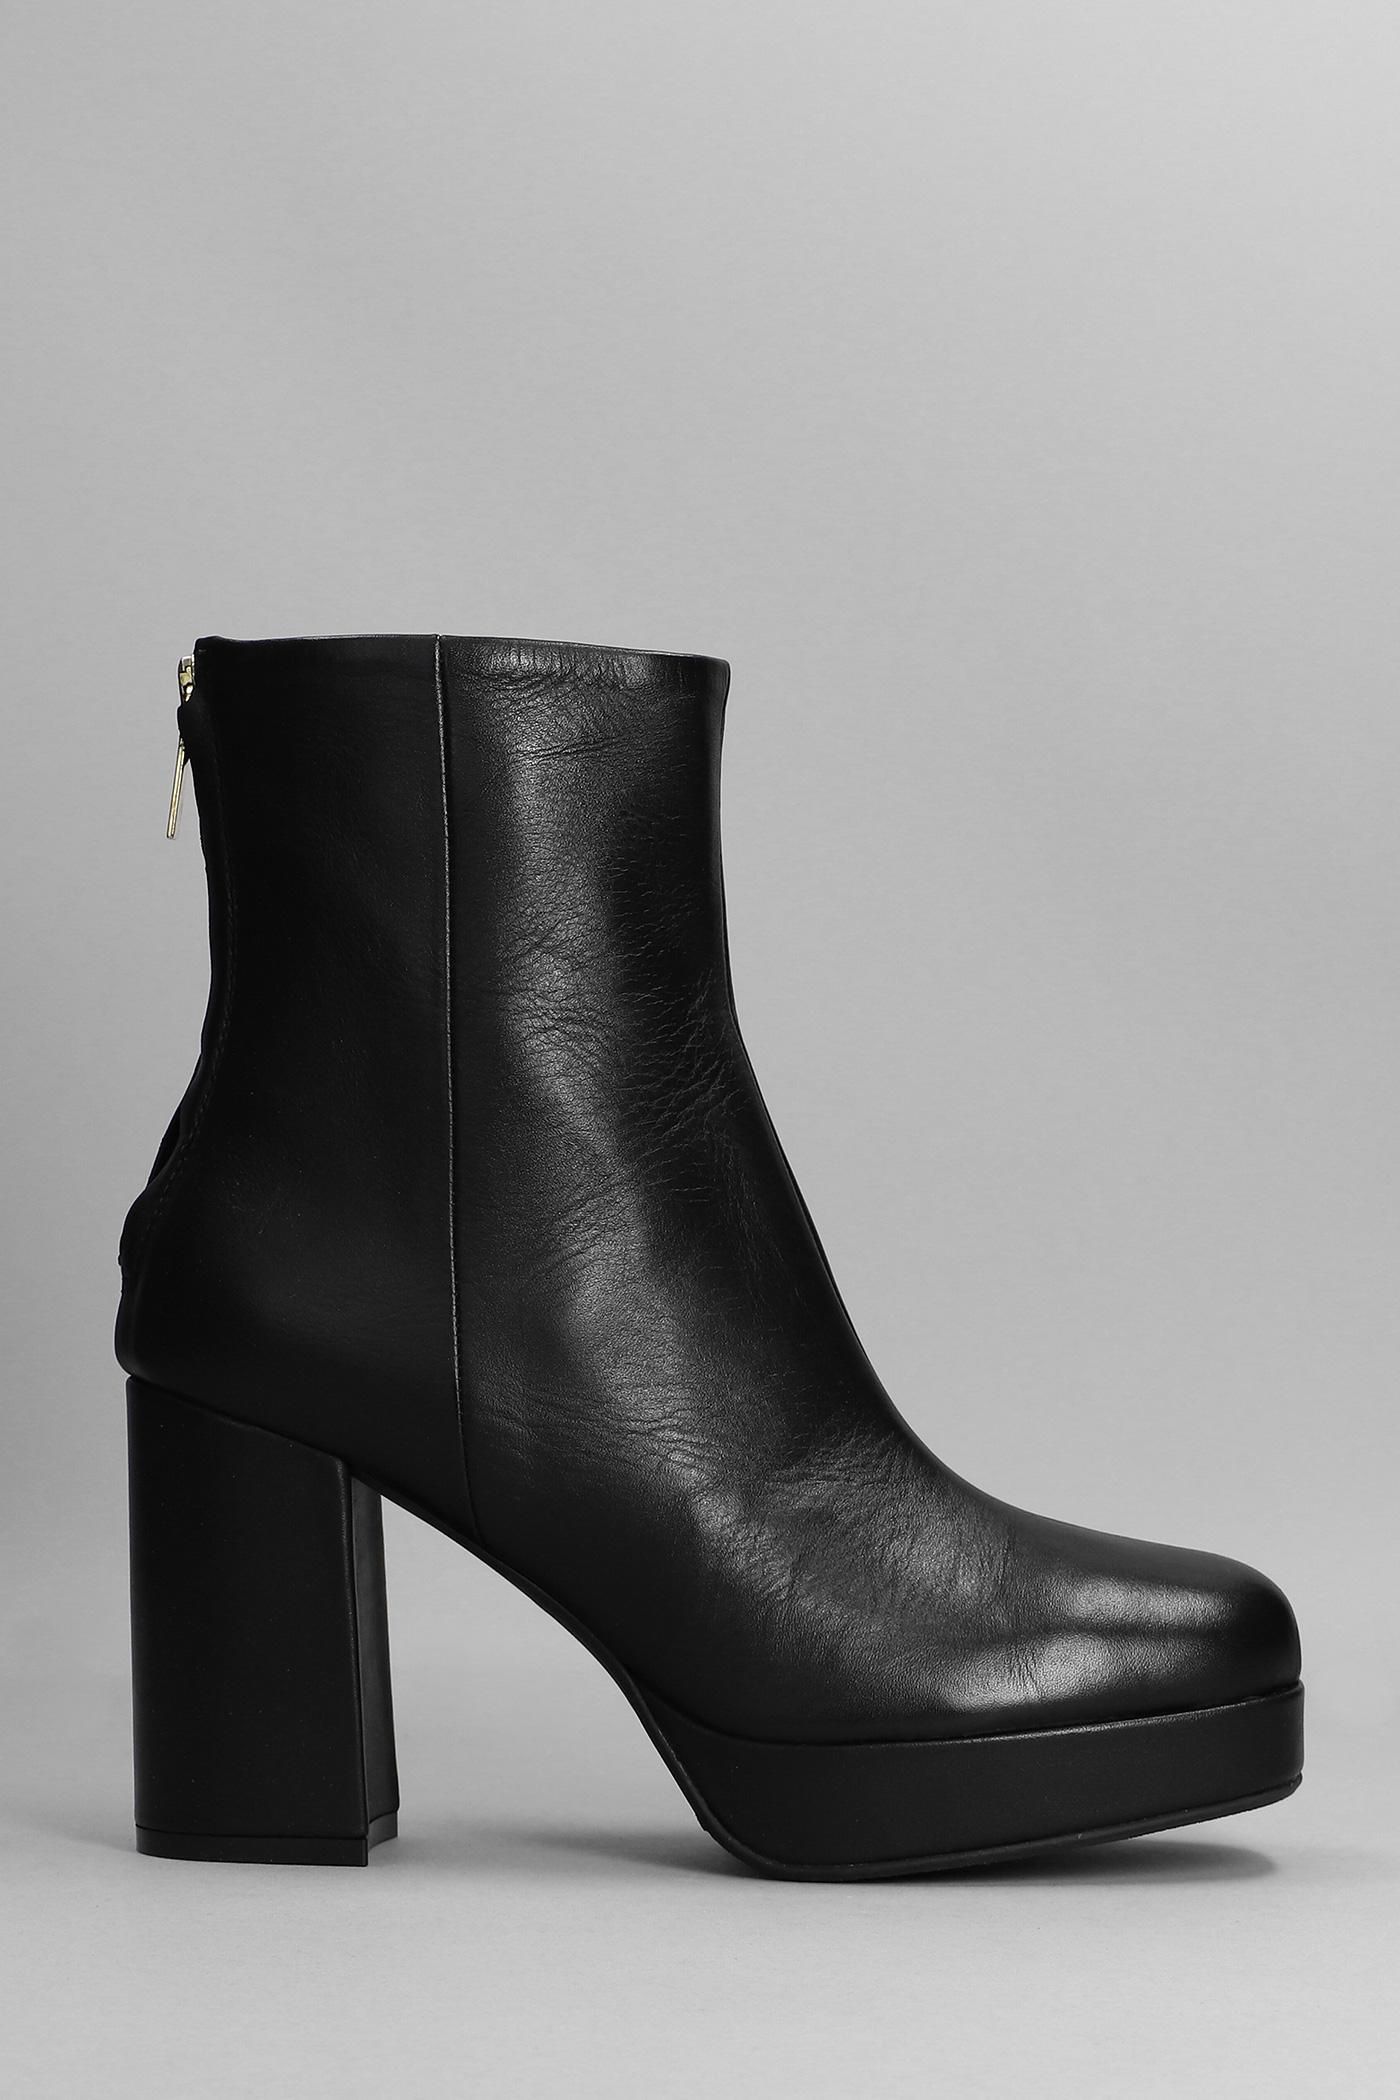 Carmens Charlize Zip High Heels Ankle Boots In Black Leather | Lyst